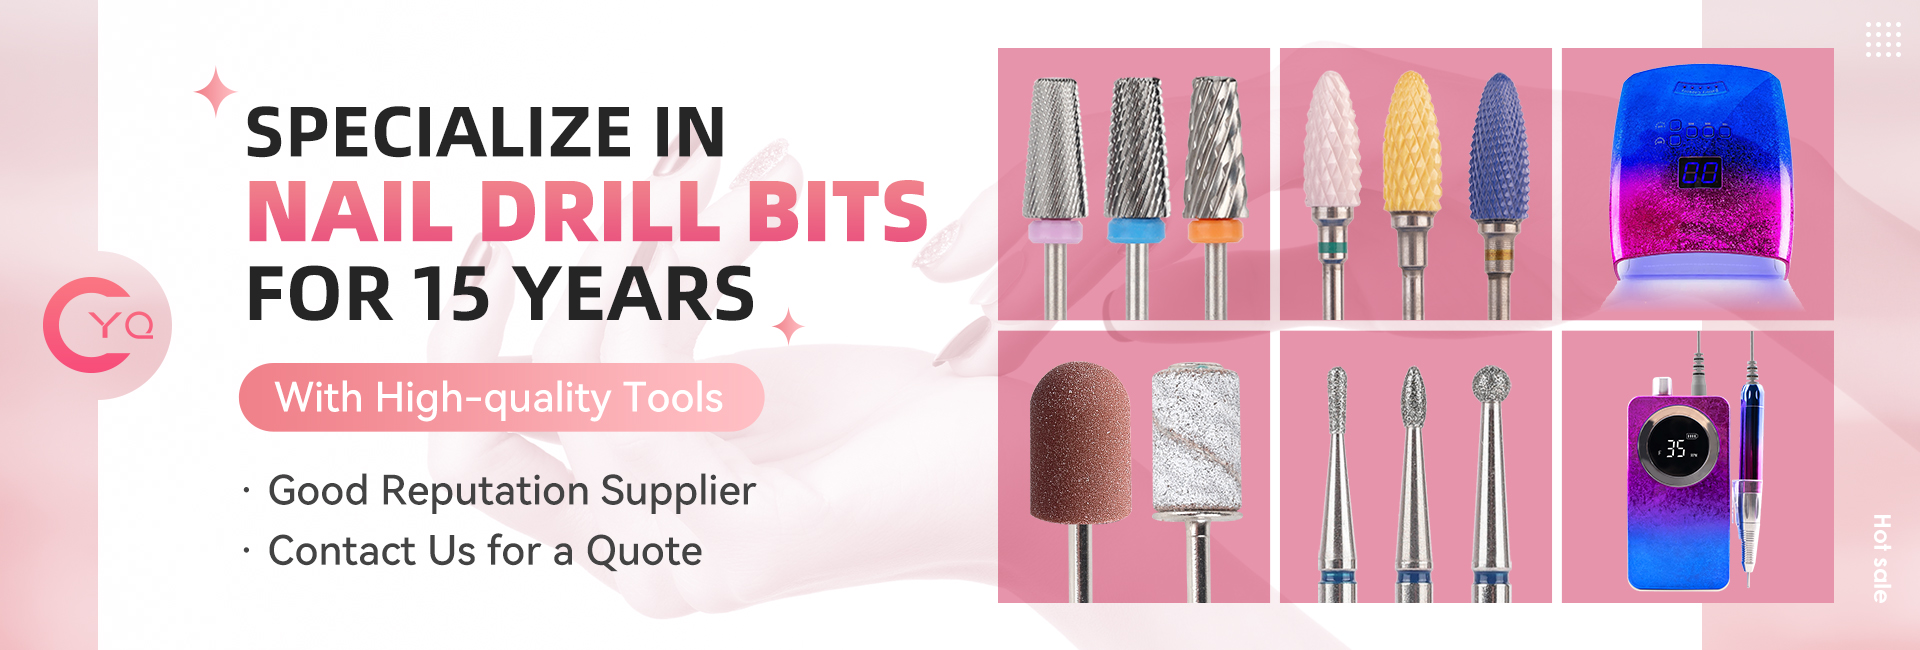 Nail Drill Bit Shapes And Uses Explained